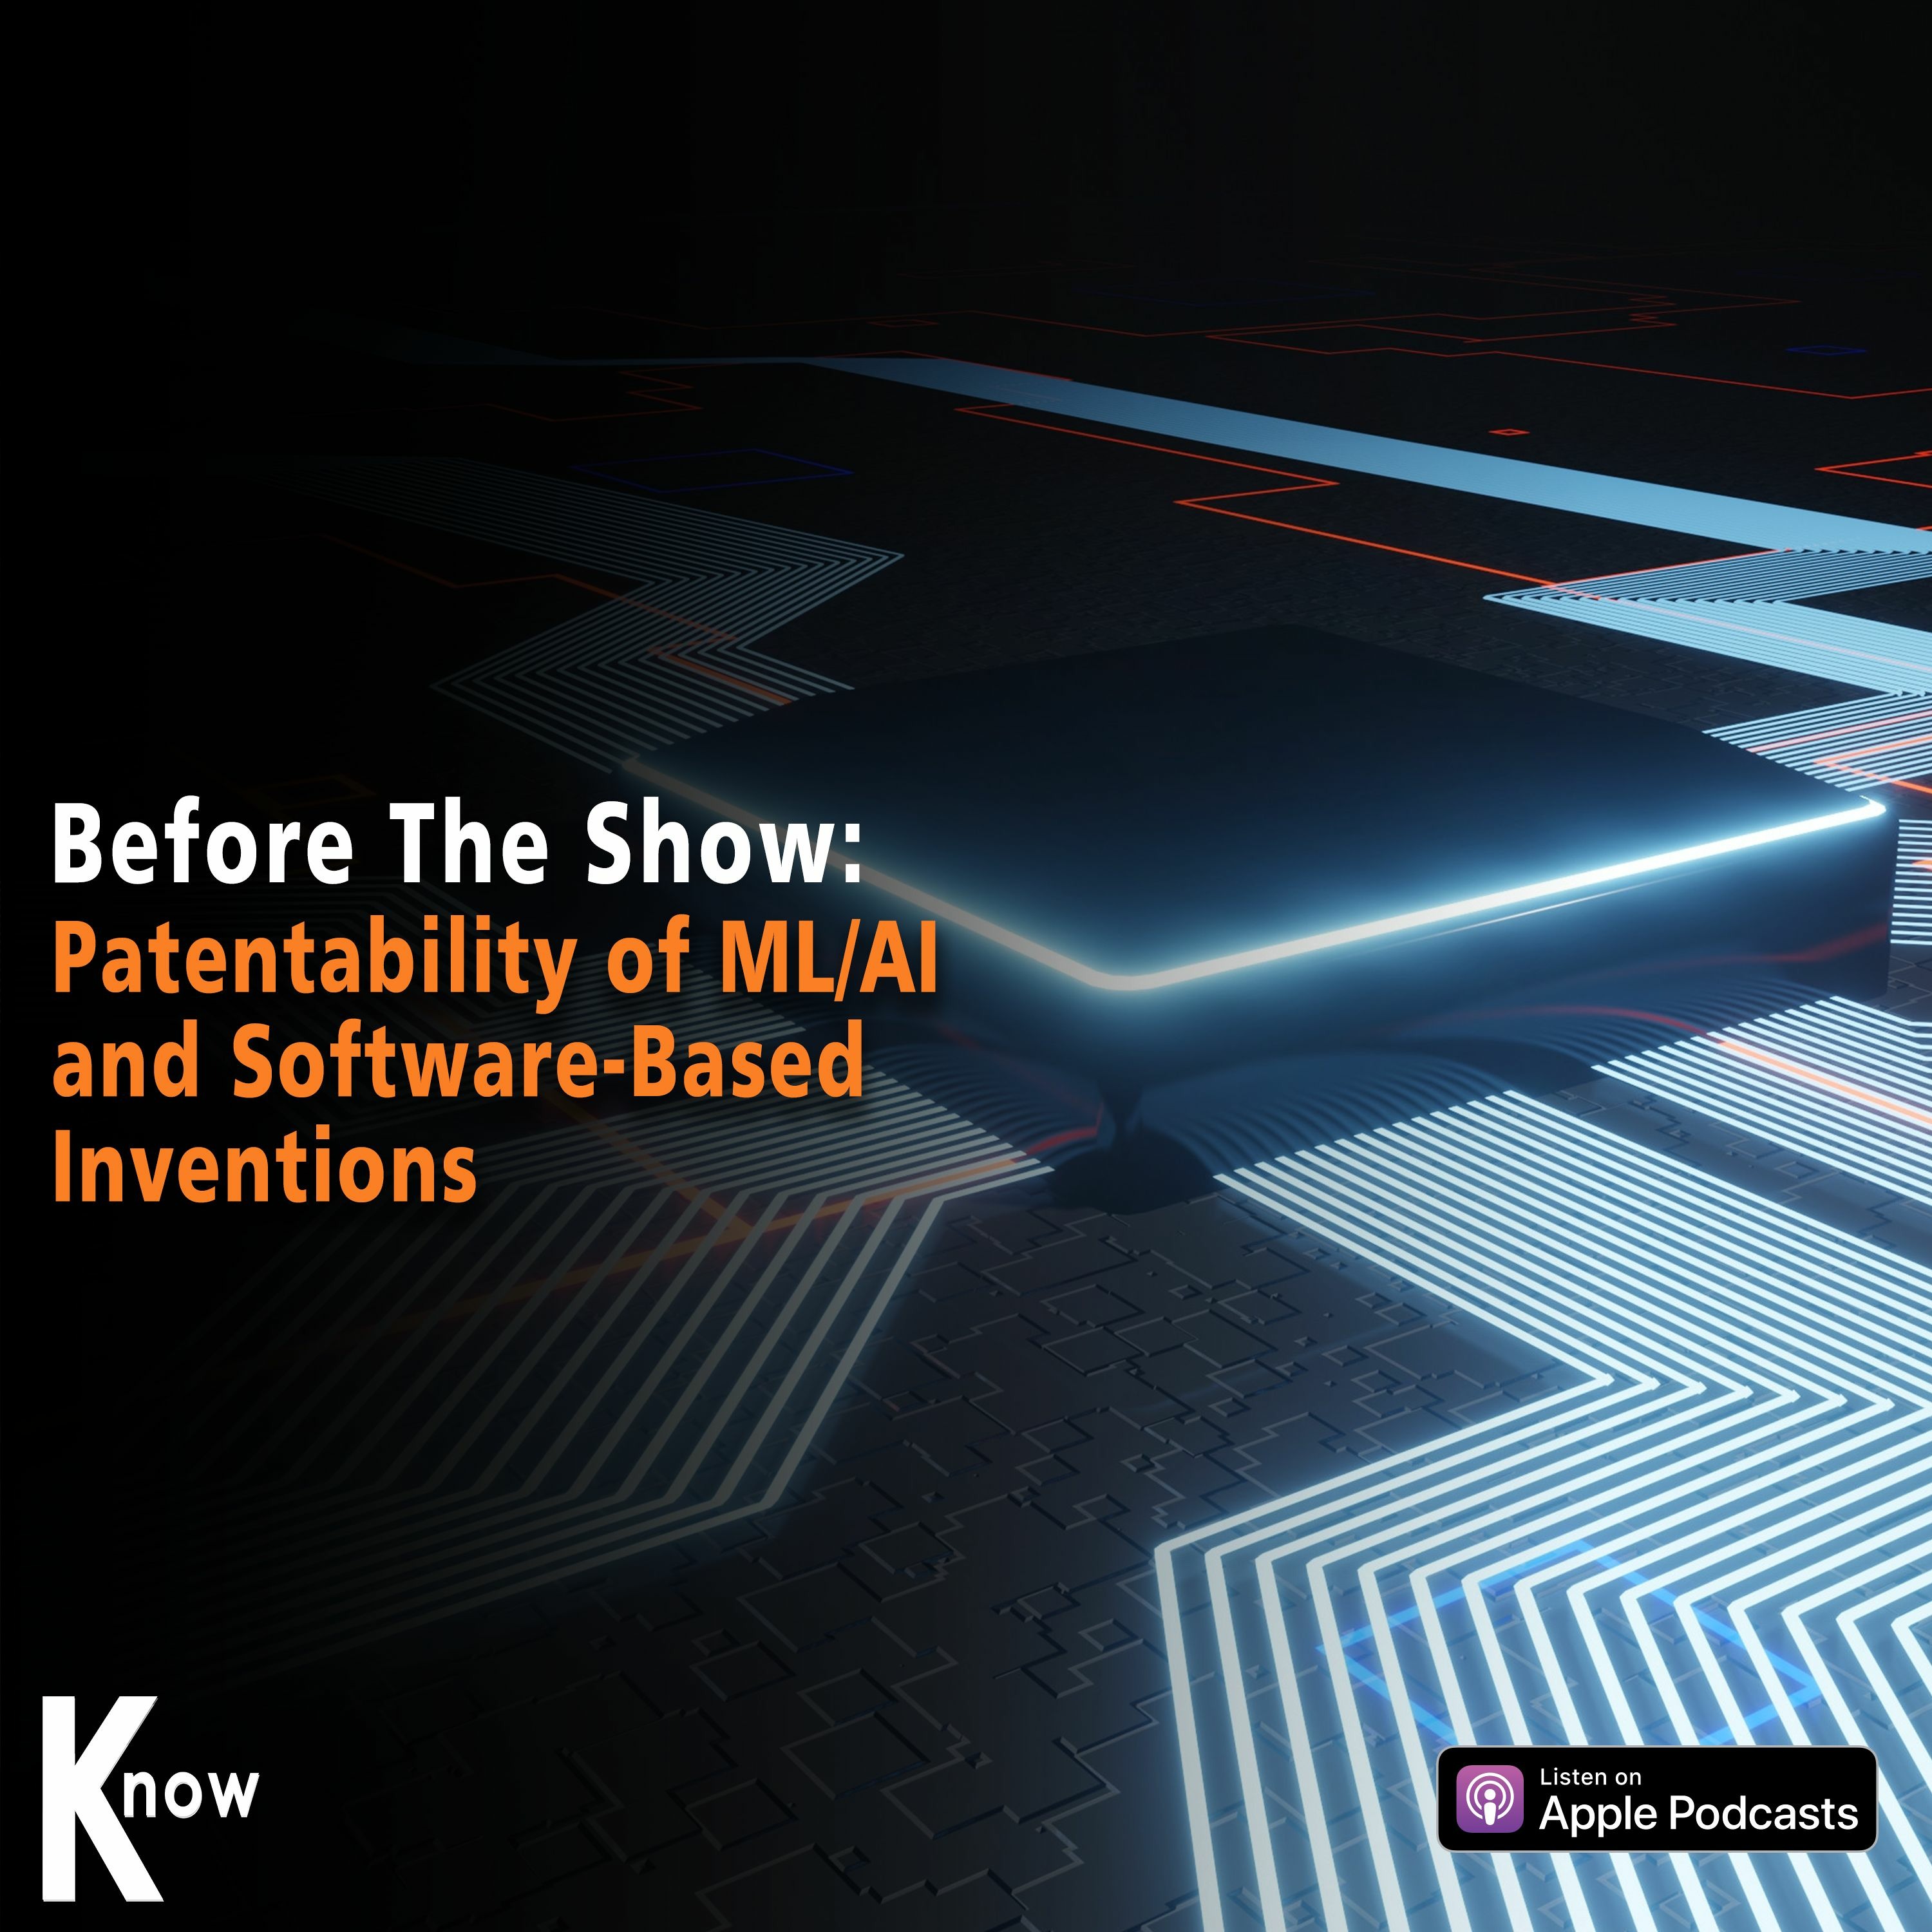 Patentability Of ML/AI And Software-Based Inventions - Before the Show #280